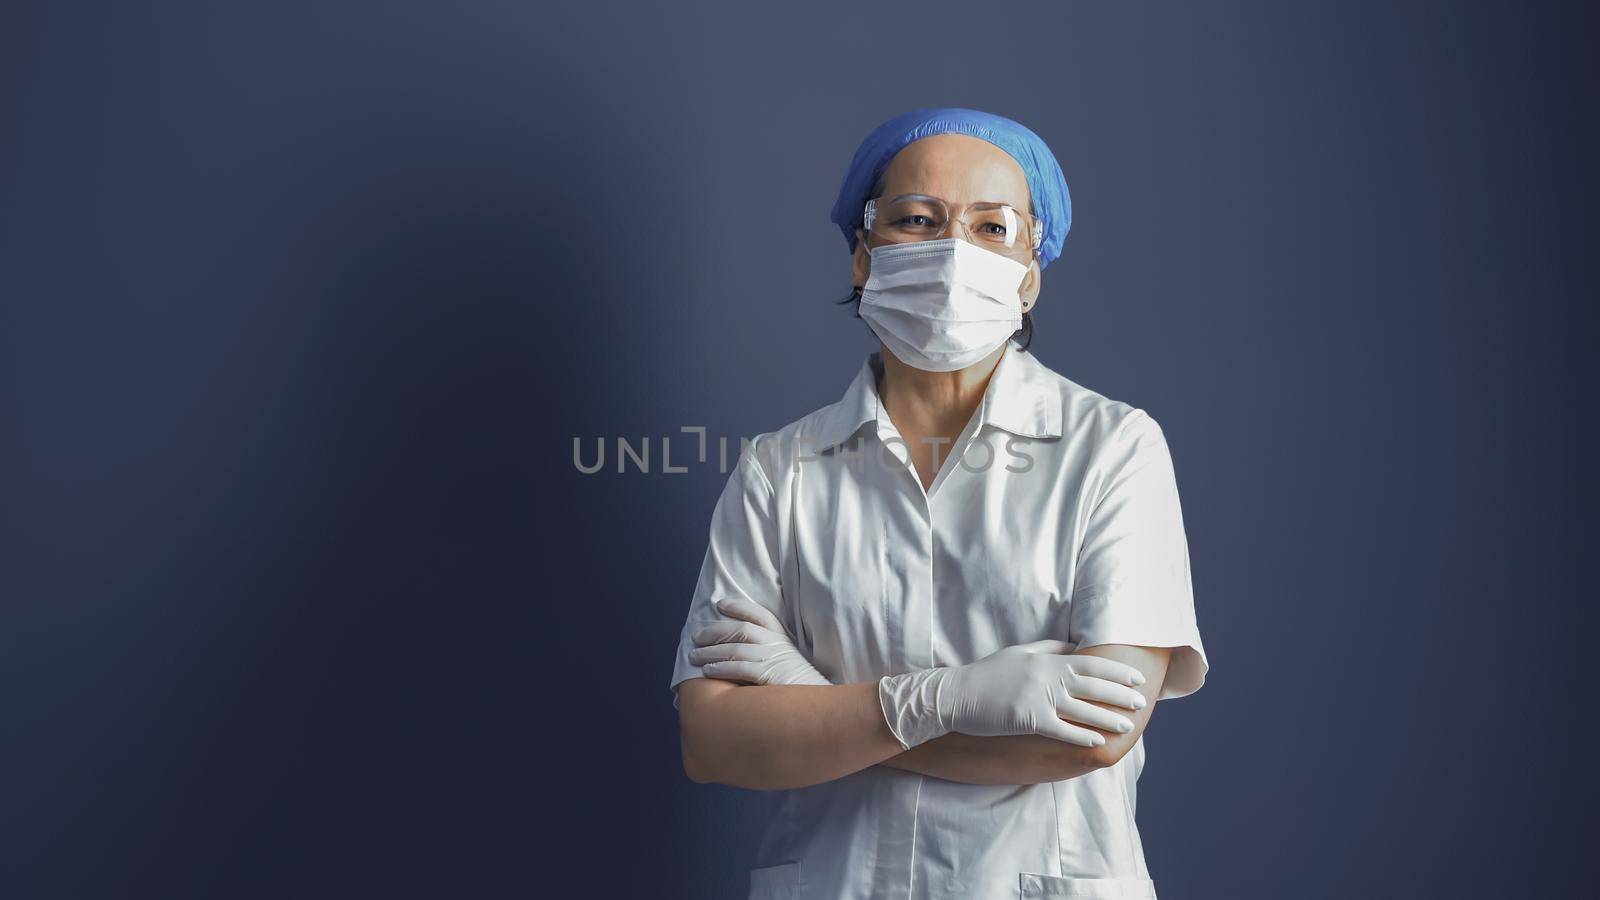 Female doctor or nurse in mask and white uniform standing crossed arms on blue gray background. Copy space for text at left side. Medicine concept. Tinted image.